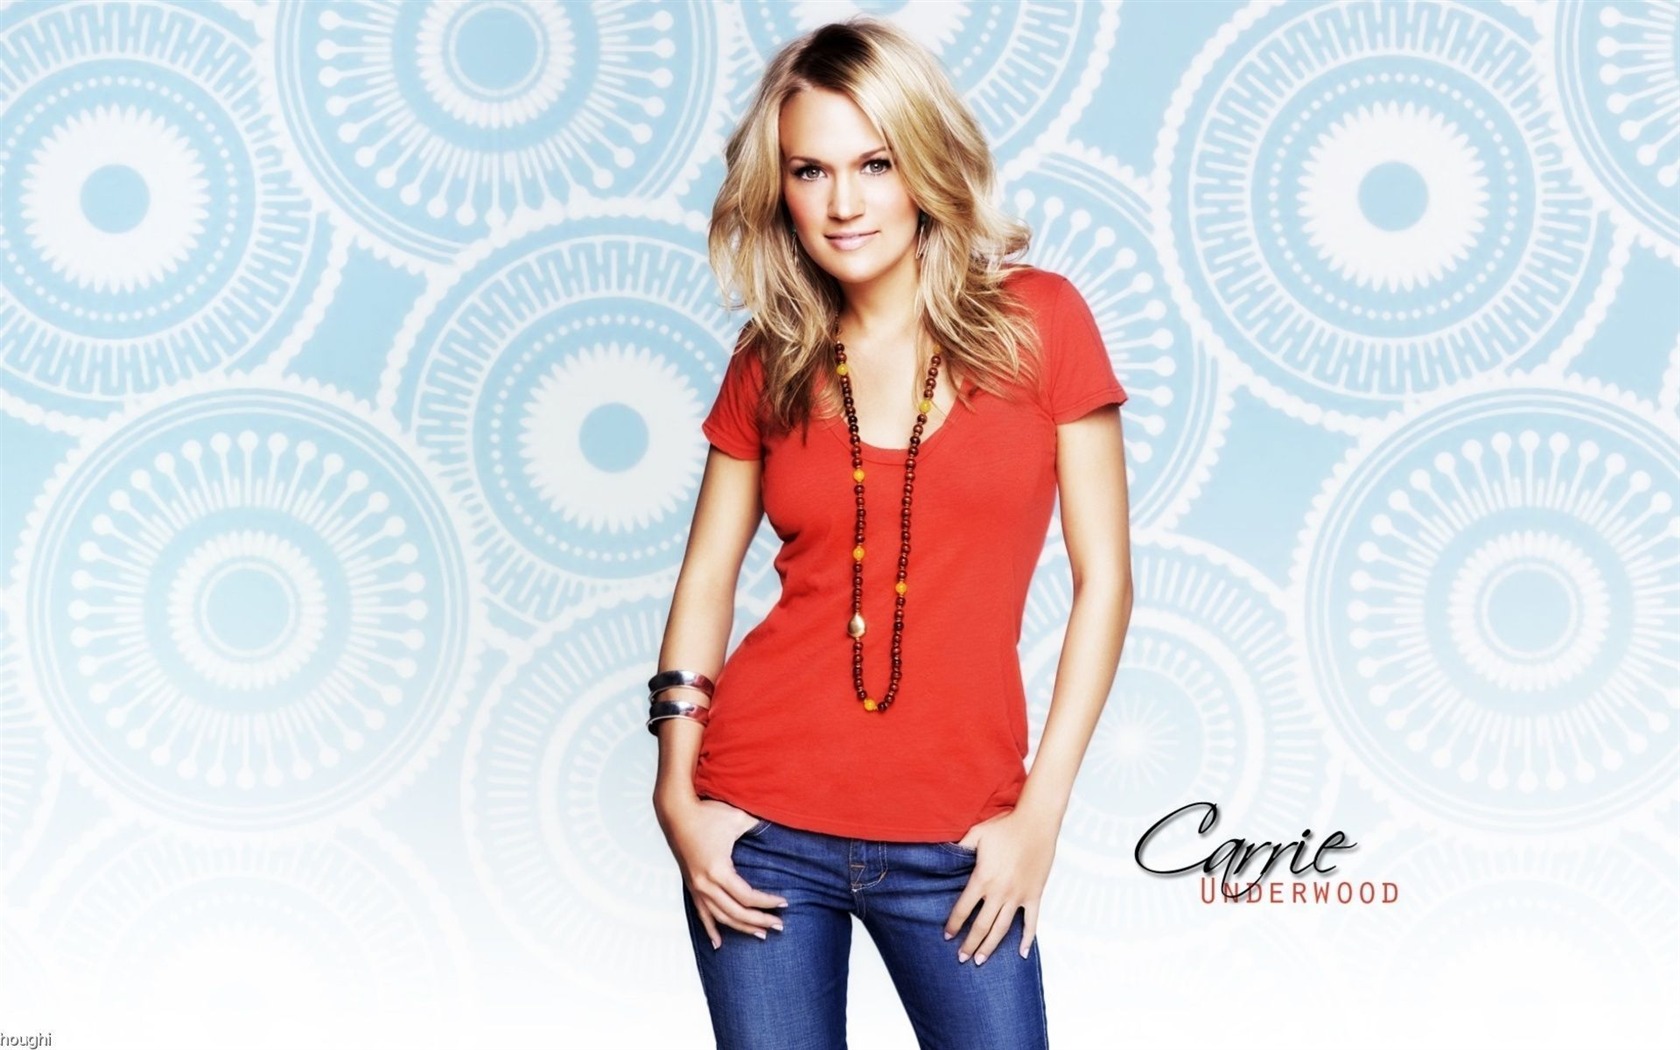 Carrie Underwood #006 - 1680x1050 Wallpapers Pictures Photos Images